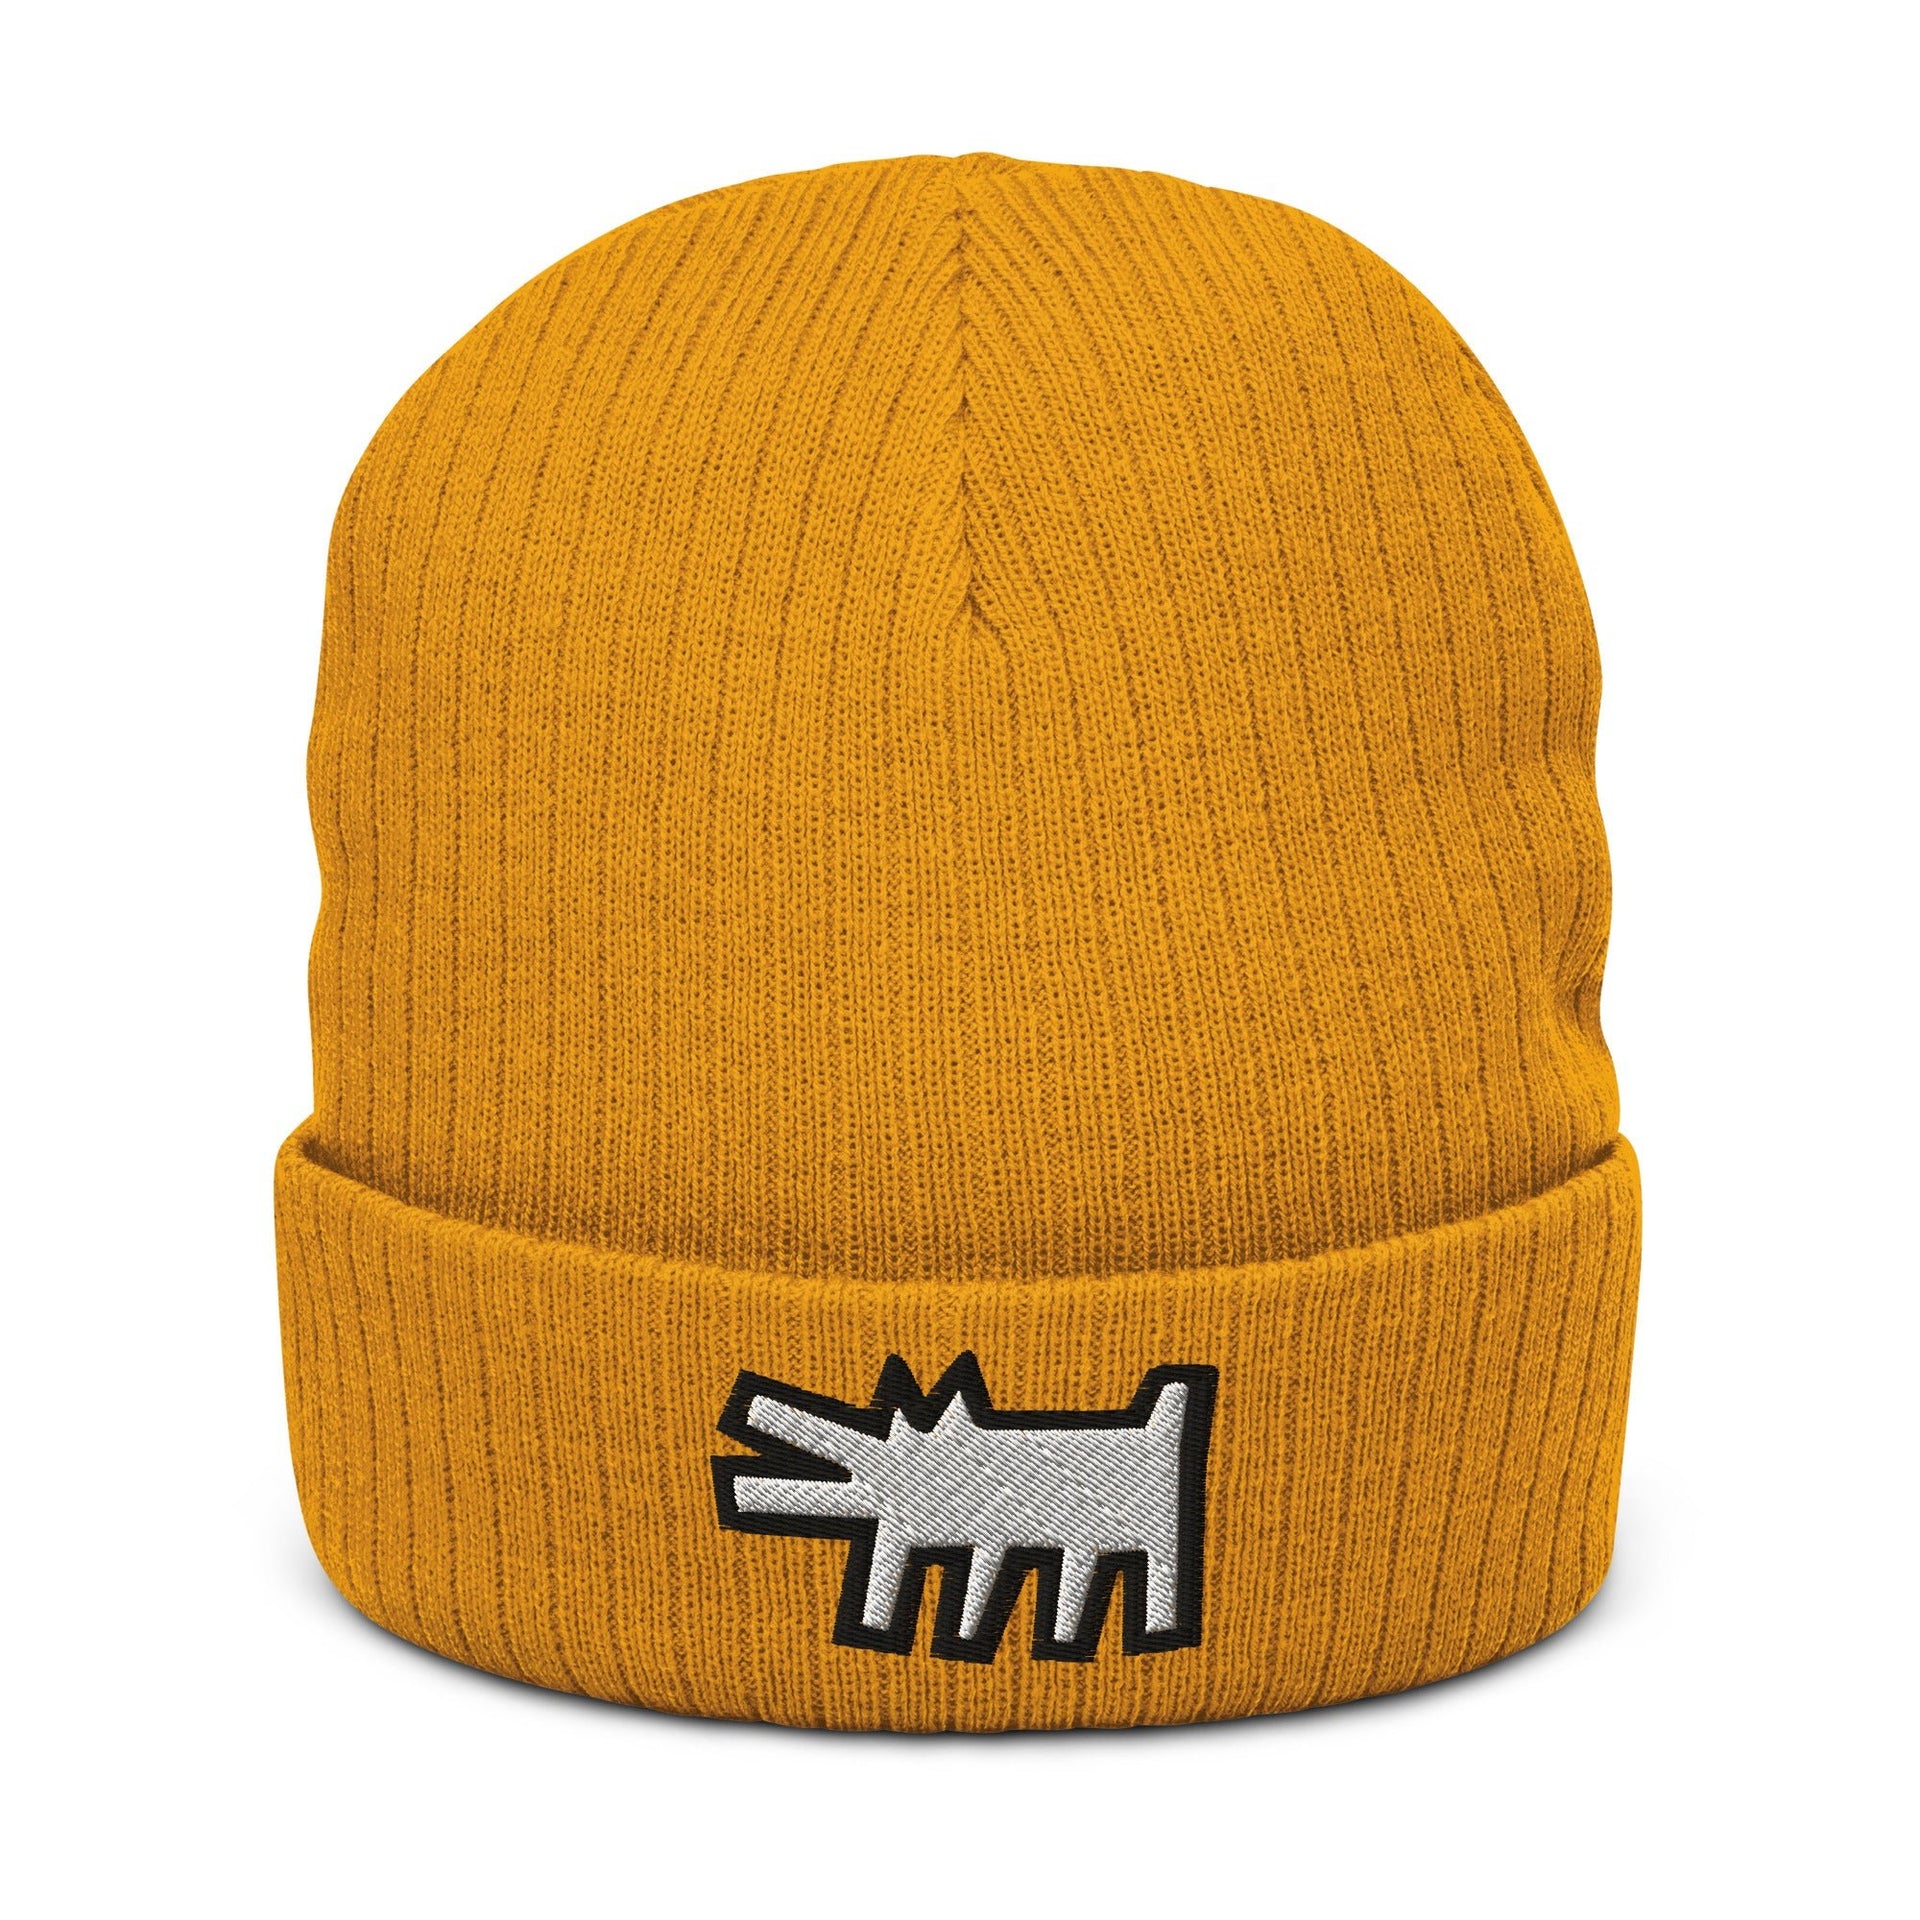 Haring the Barking Dog (1990) Ribbed Knit Beanie - Accessories - Harvey Ltd